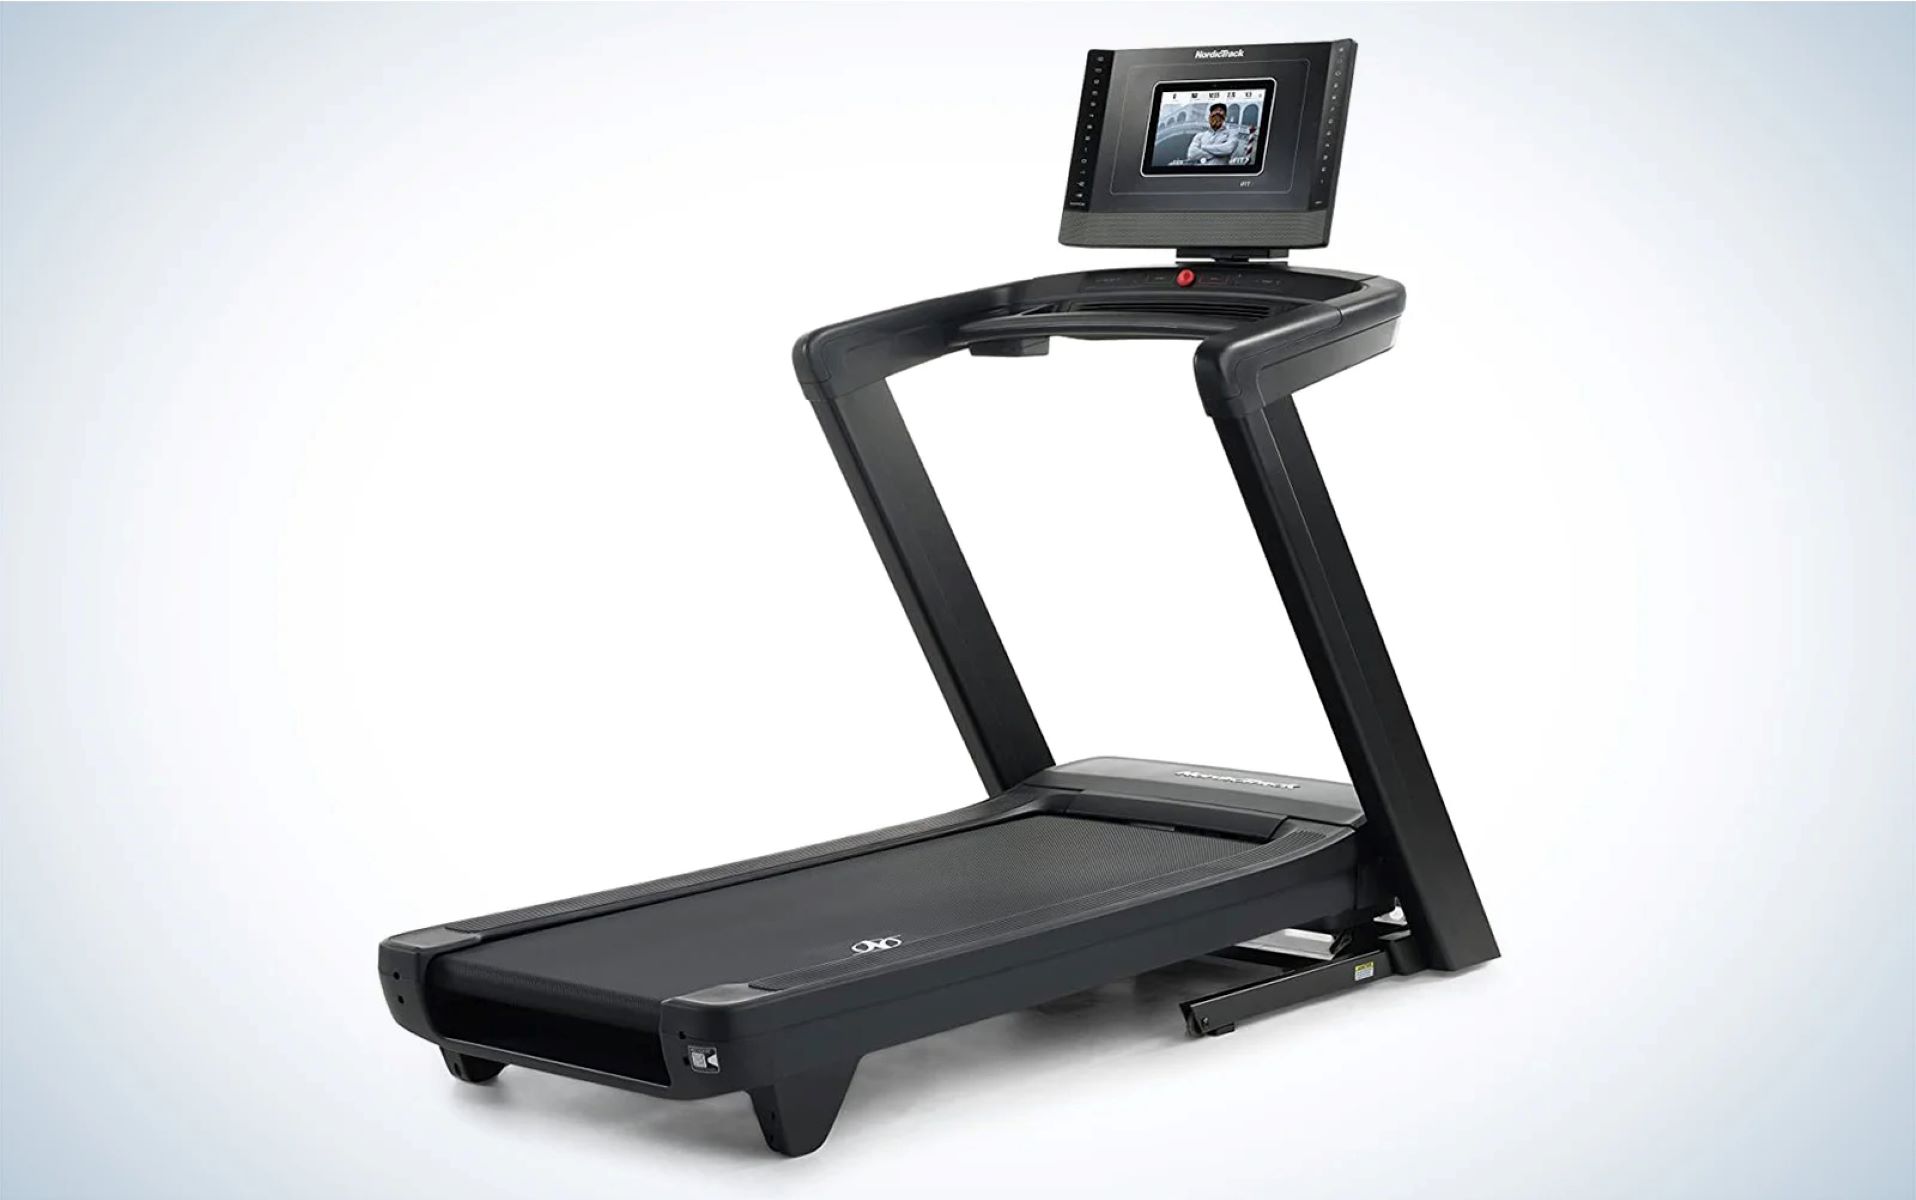 Where To Buy NordicTrack Treadmill